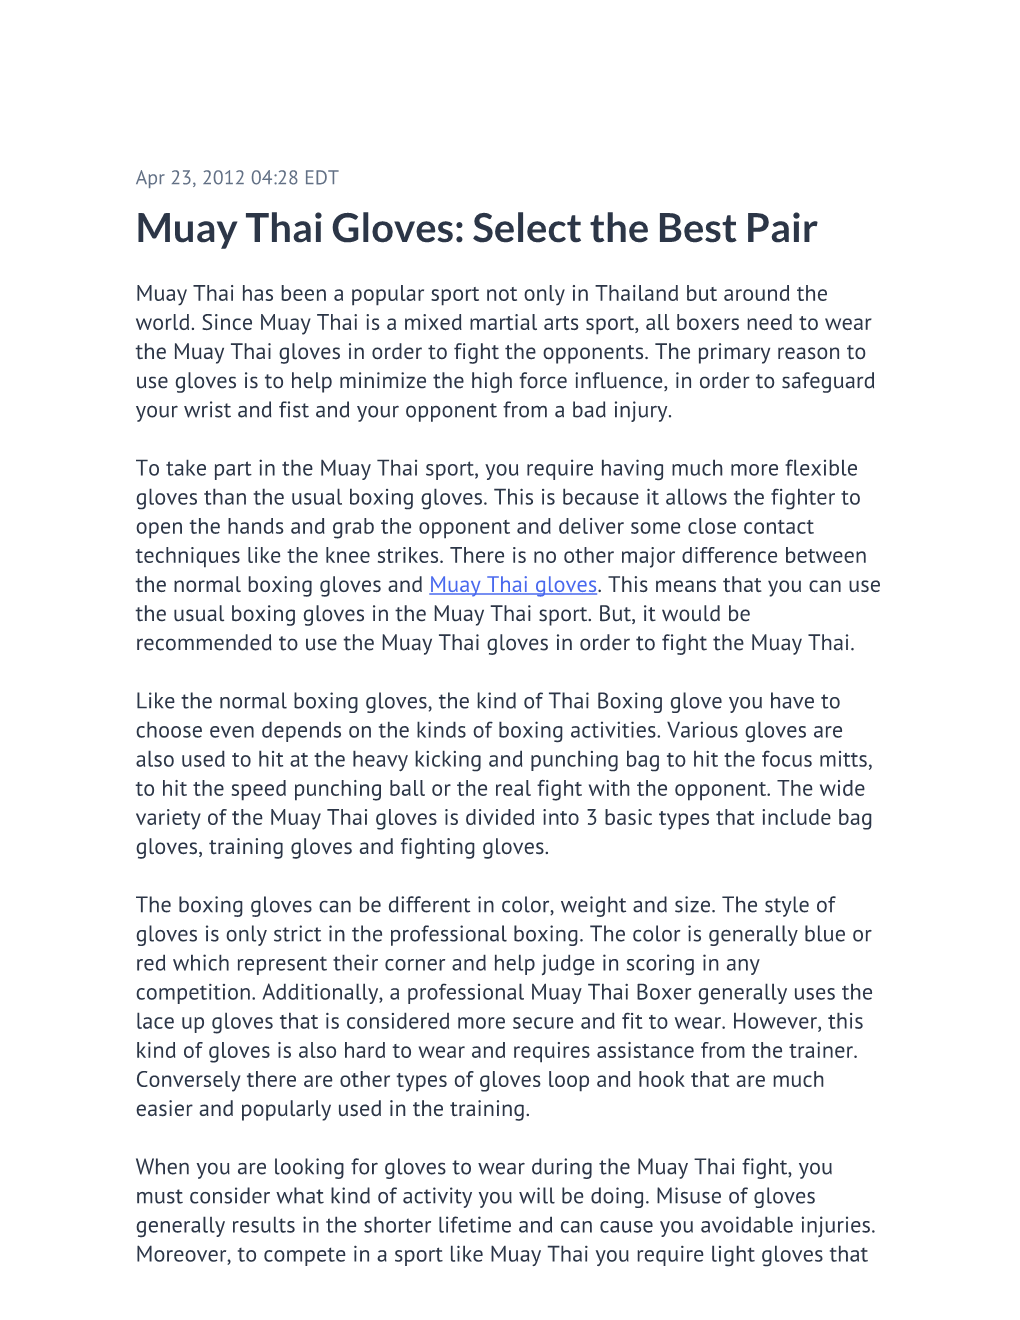 Muay Thai Gloves: Select the Best Pair